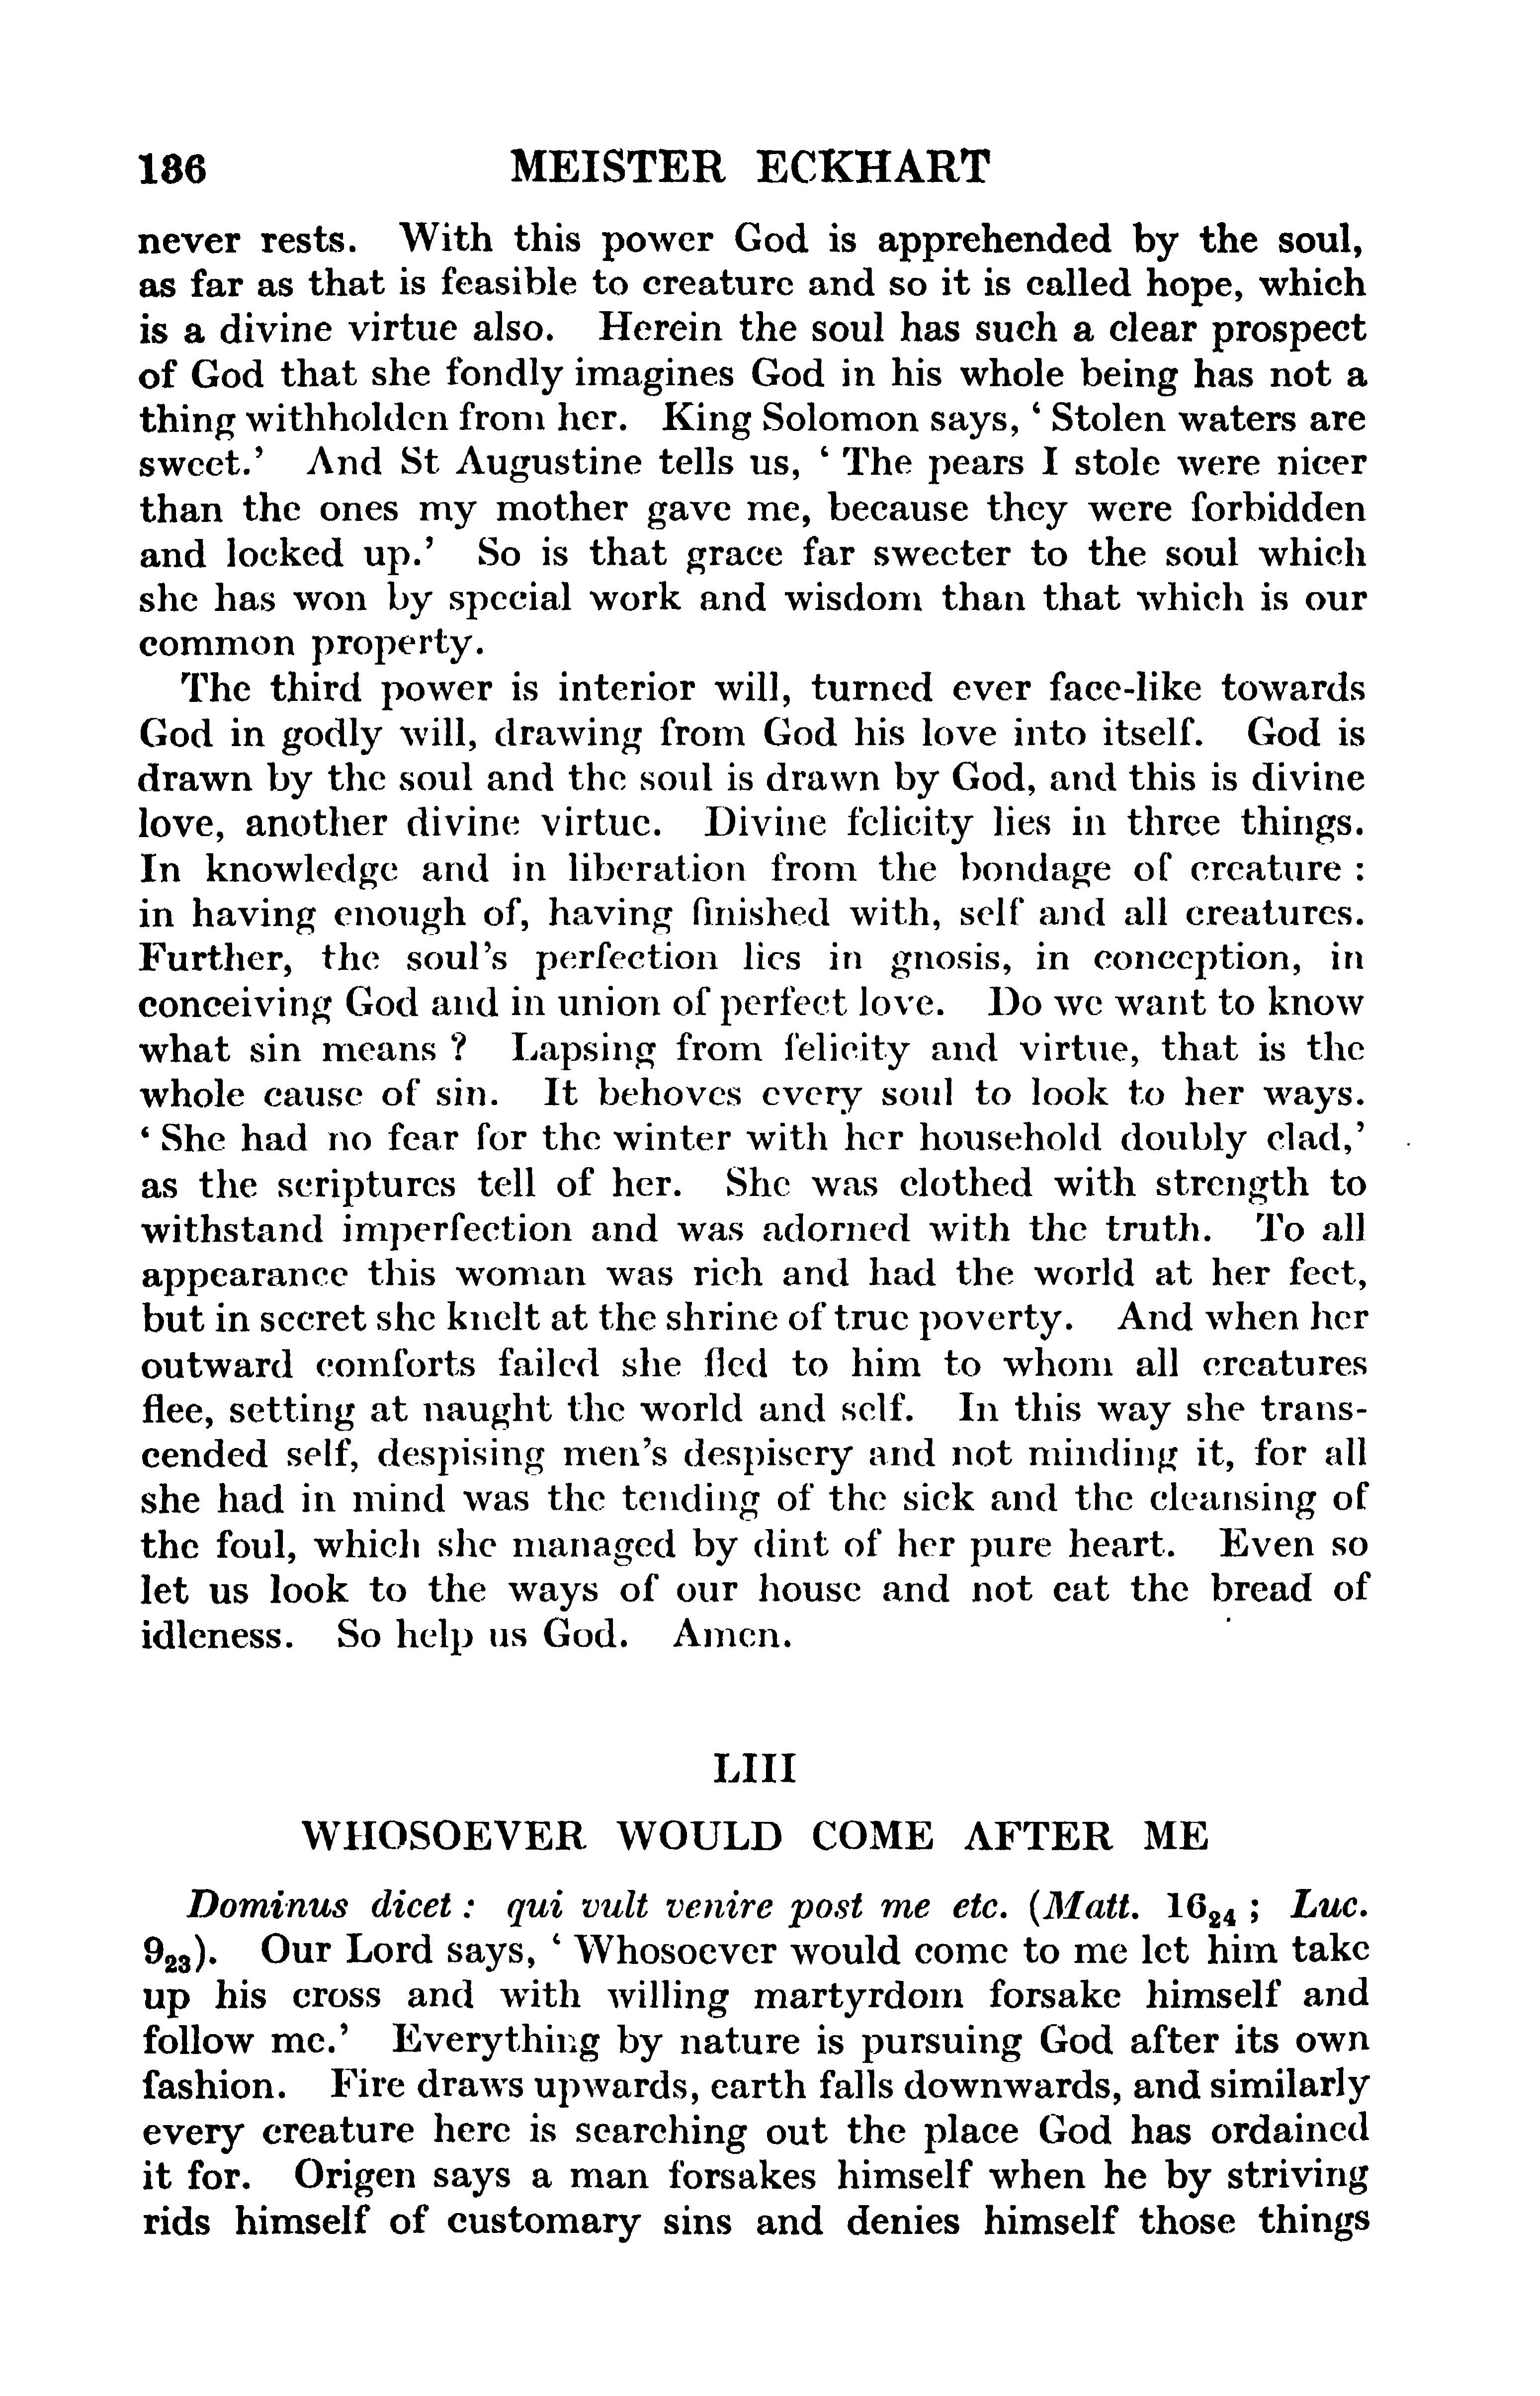 Image of page 0160